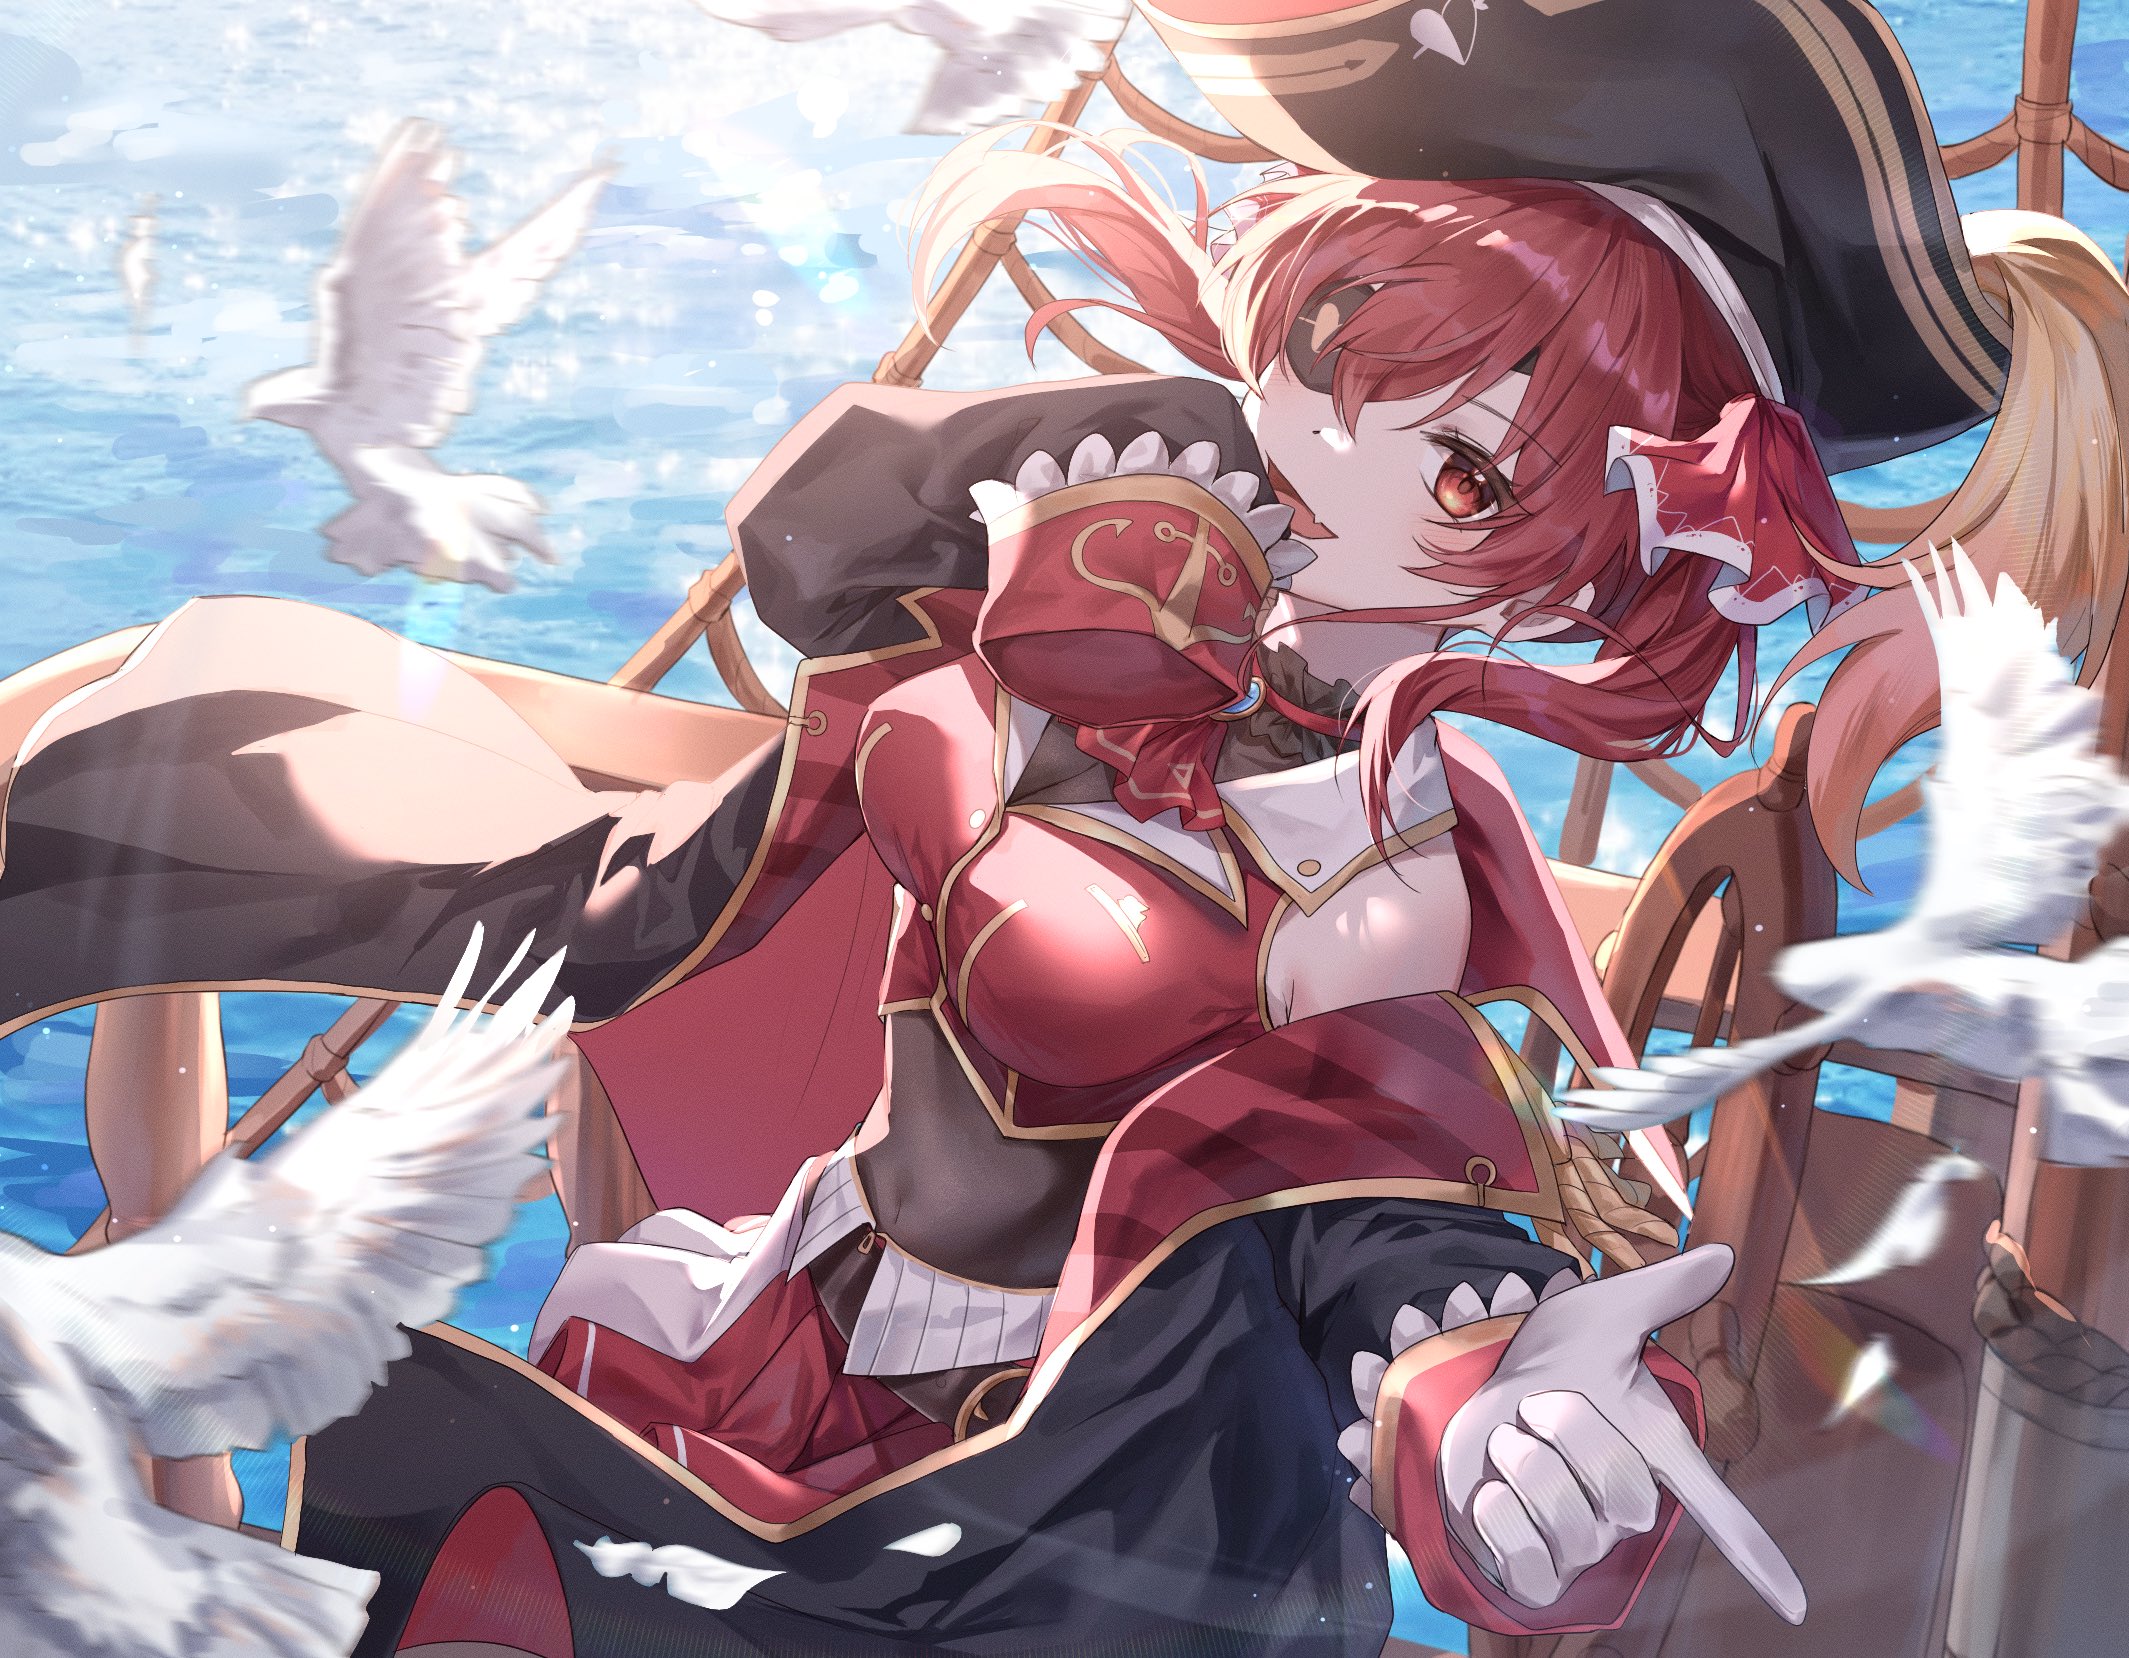 Hosho Marine Virtual Youtuber Hololive Pirate Girl Anime Girls Birds Eyepatches Pirate Hat Gloves Lo 2129x1658